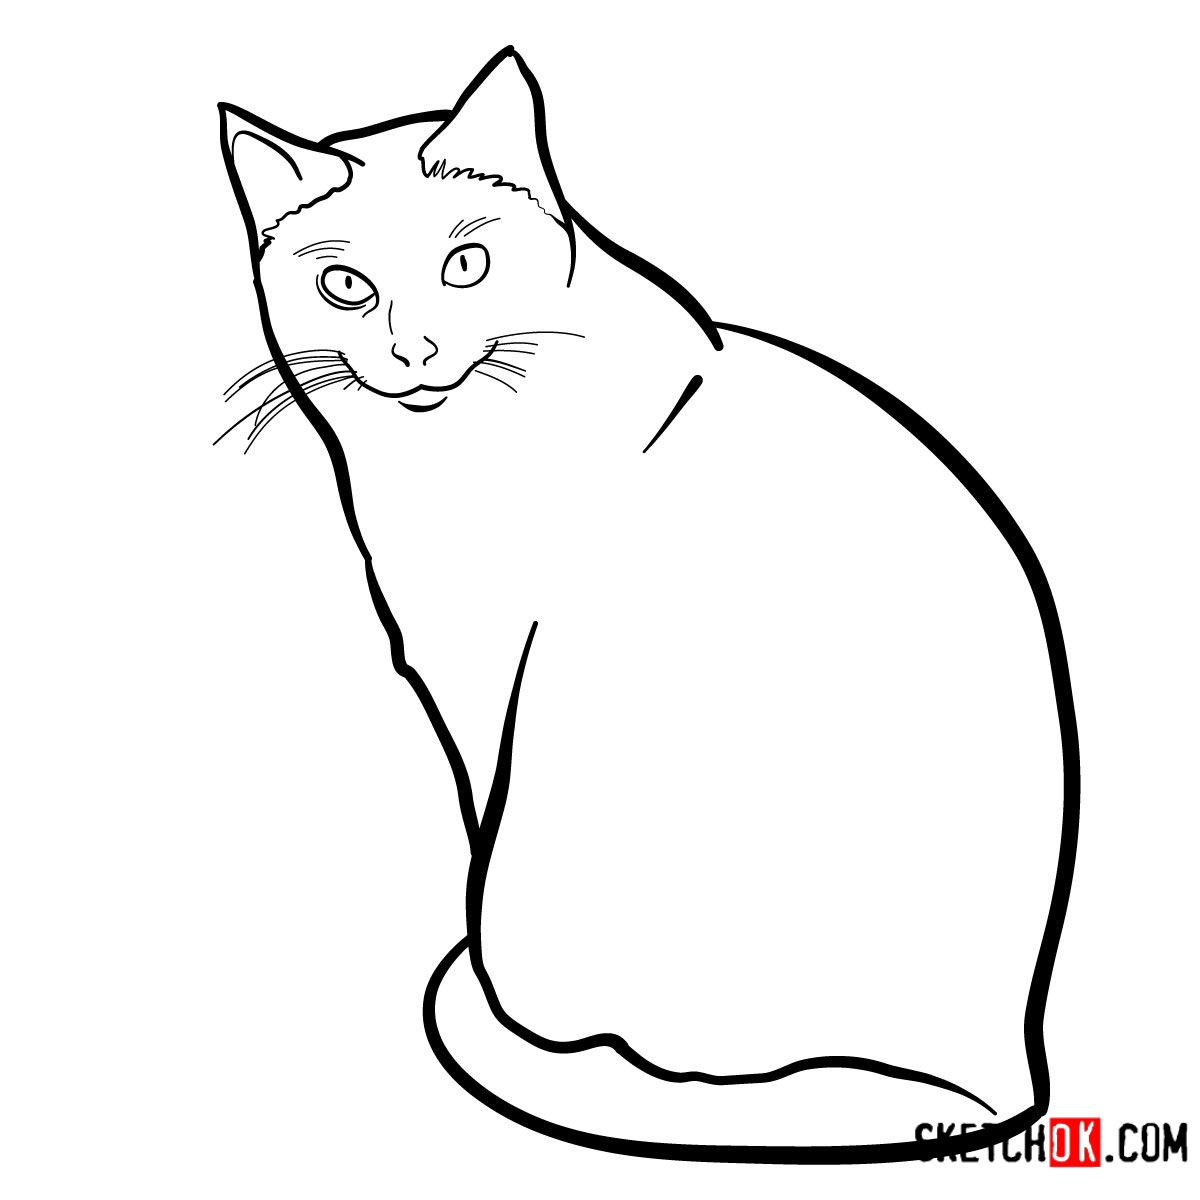 How to draw the Siamese cat - step 08